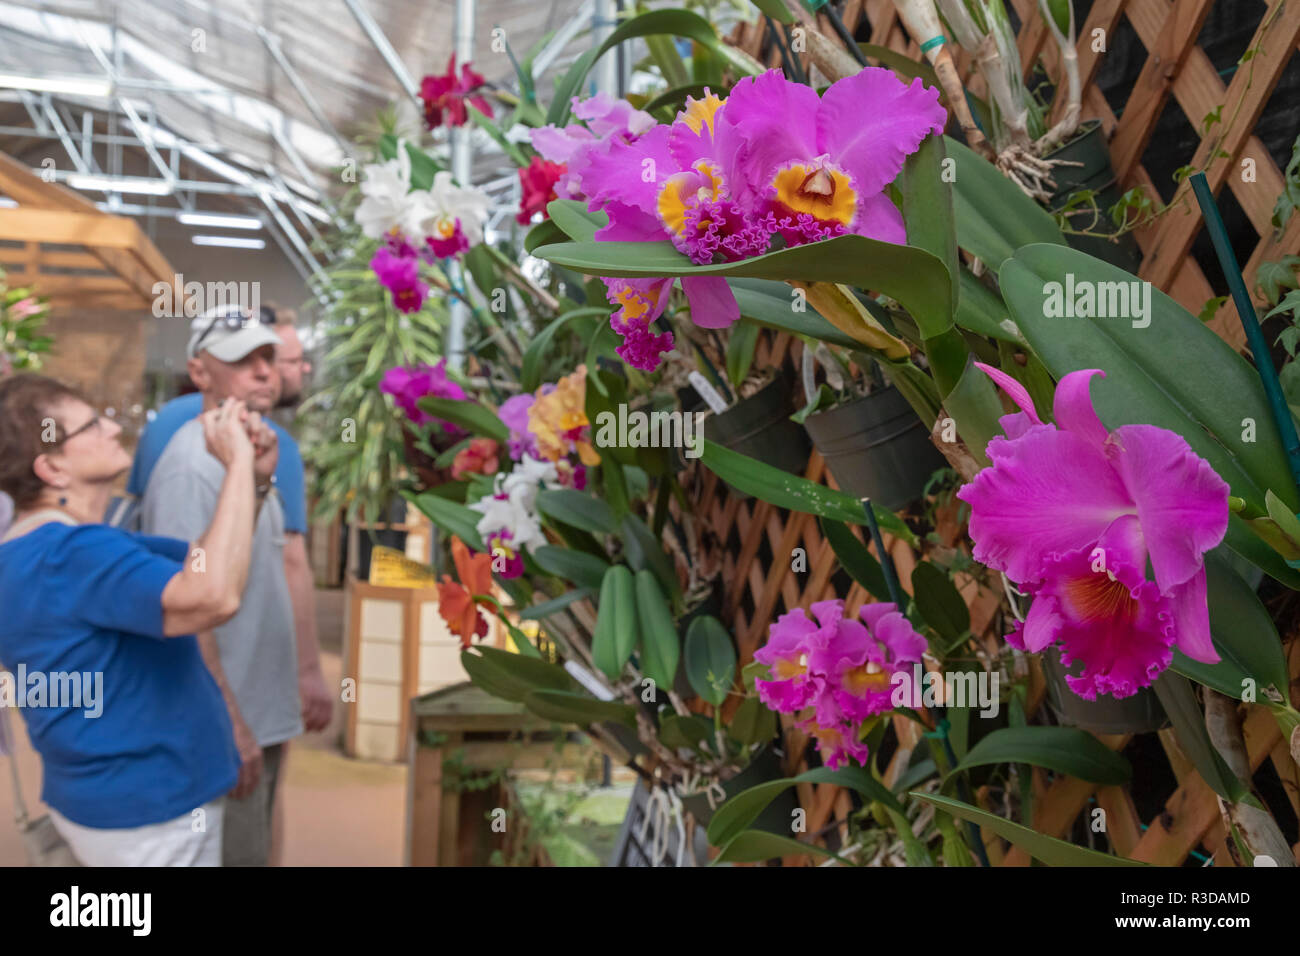 Volcano, Hawaii - Visitors photograph orchids at Akatsuka Orchid Gardens on Hawaii's Big Island. The orchid nursery is a family business, started in 1 Stock Photo